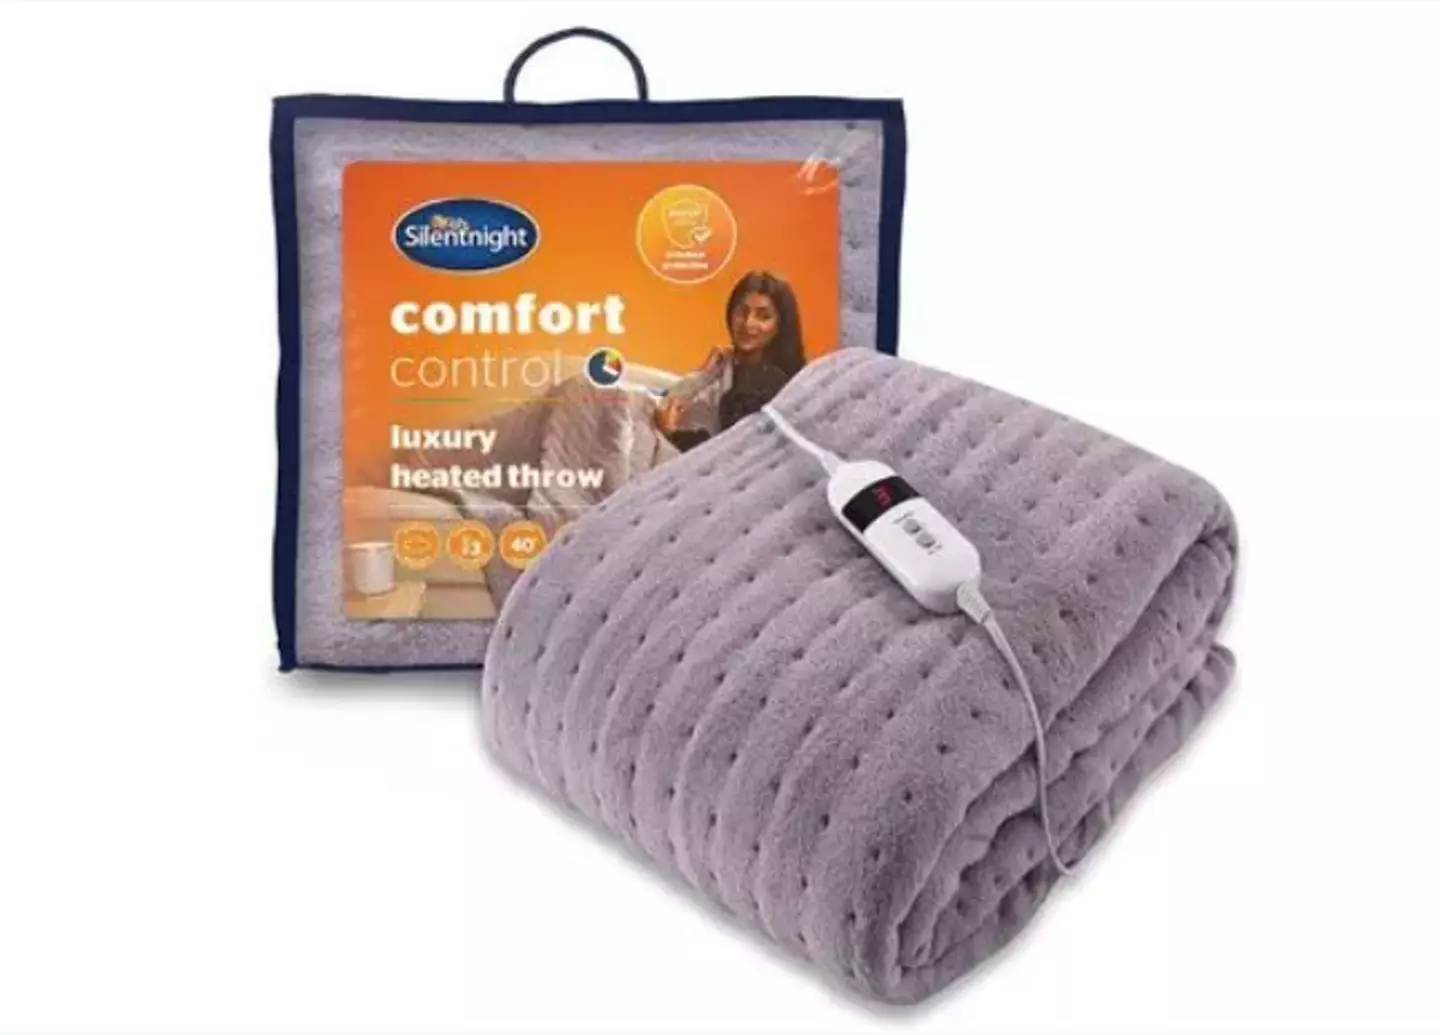 This heated blanket will only cost £3 a day to keep you warm.